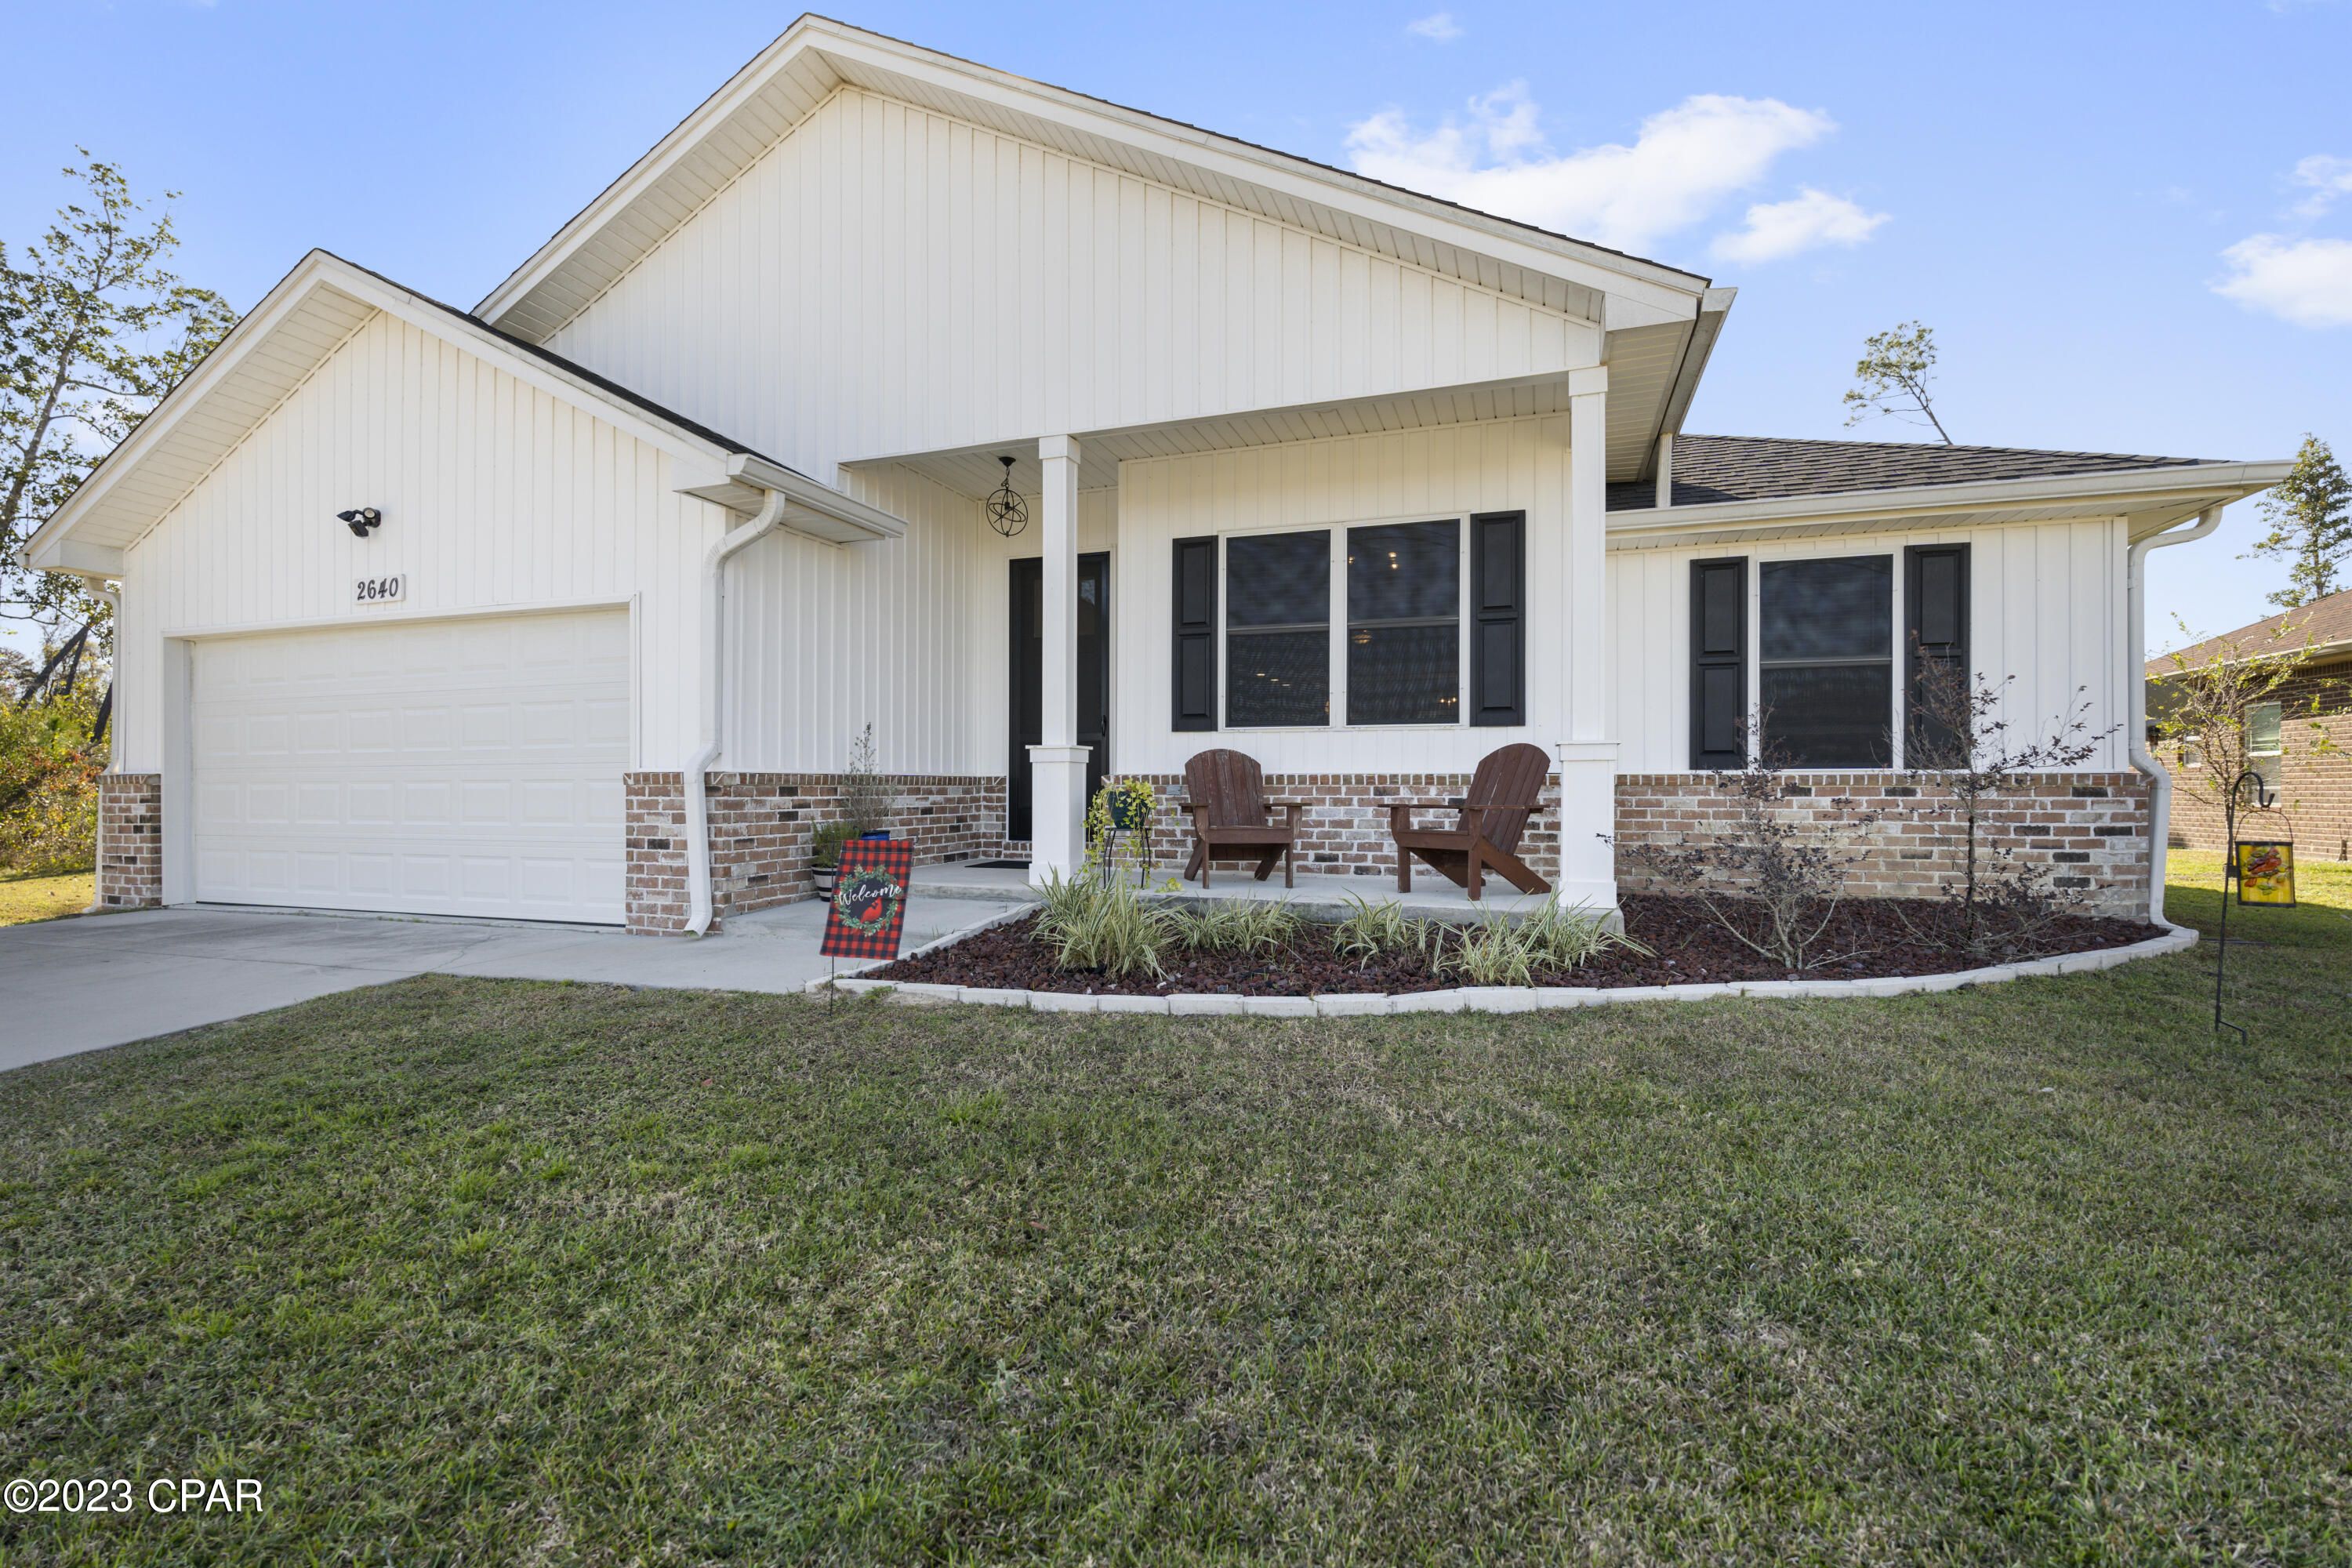 Homes for sale in Panama City | View 2640 E 39th Street | 3 Beds, 2 Baths